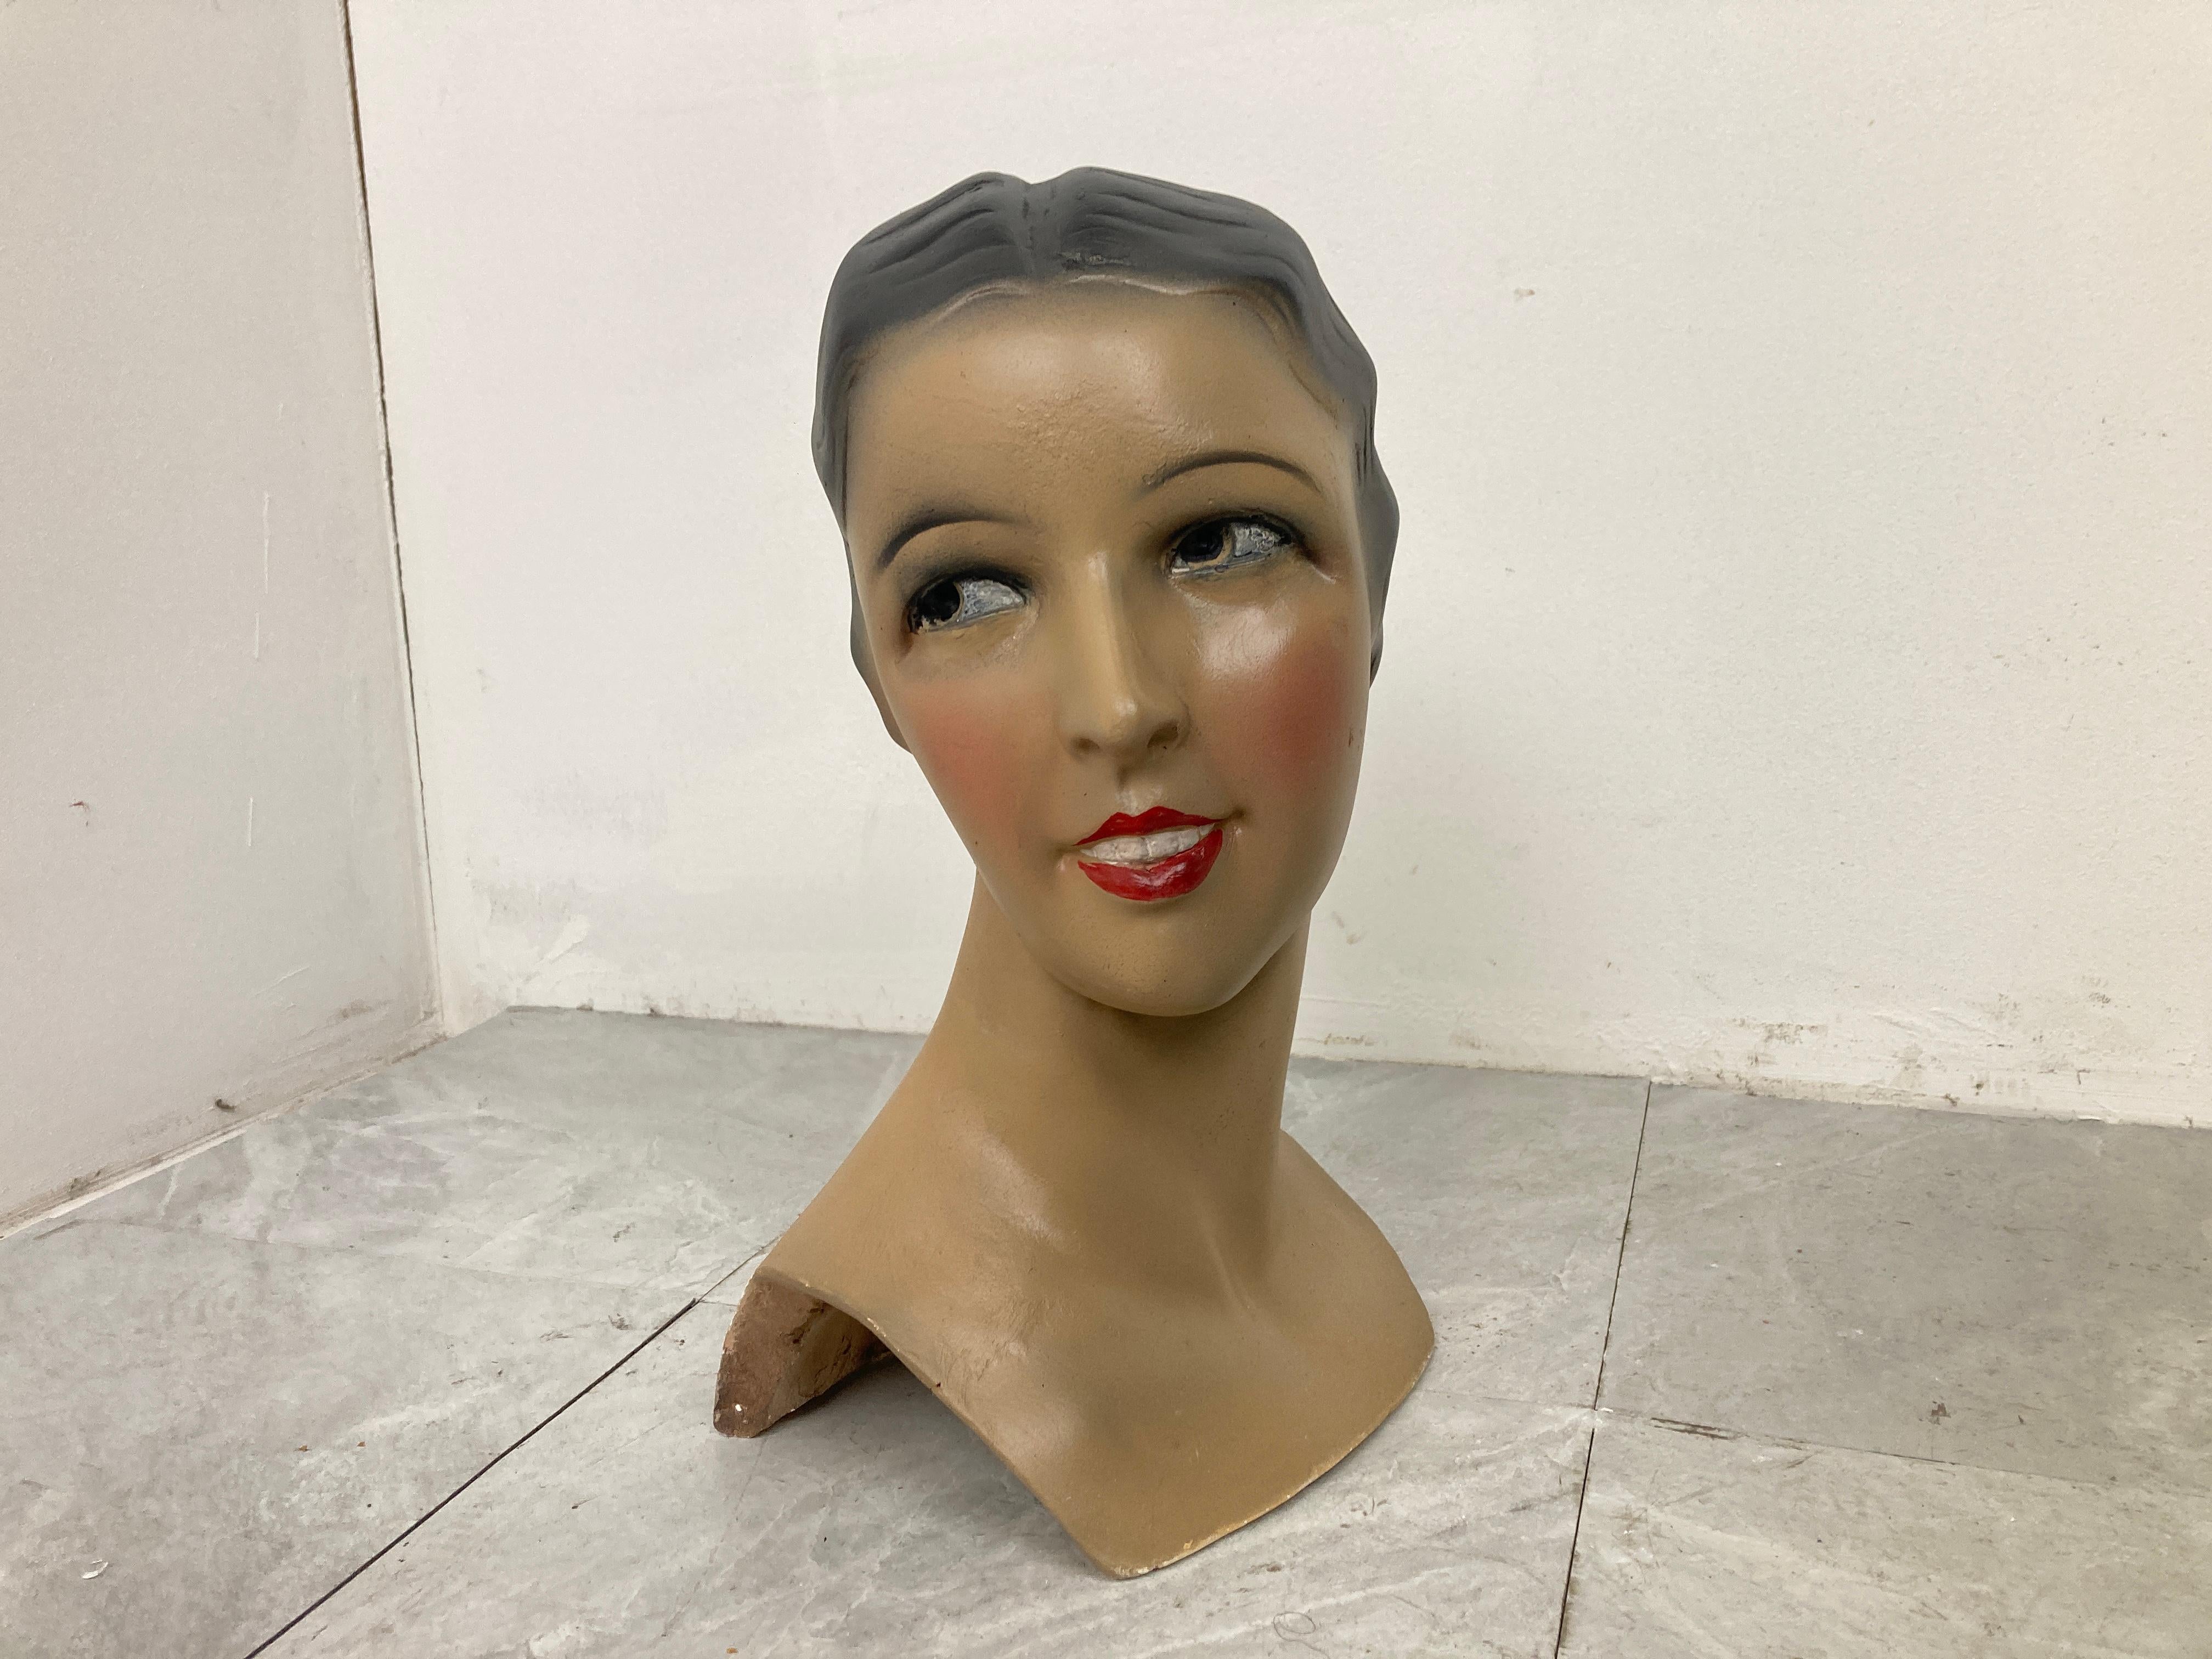 Beautiful female mannequin head made from plaster servings as an advertising bust in a shop.

It was used to be displayed at a shopcounter or vitrine.

It has some minor user traces.

Comes from a lot acquired from a clothes shop that stopped